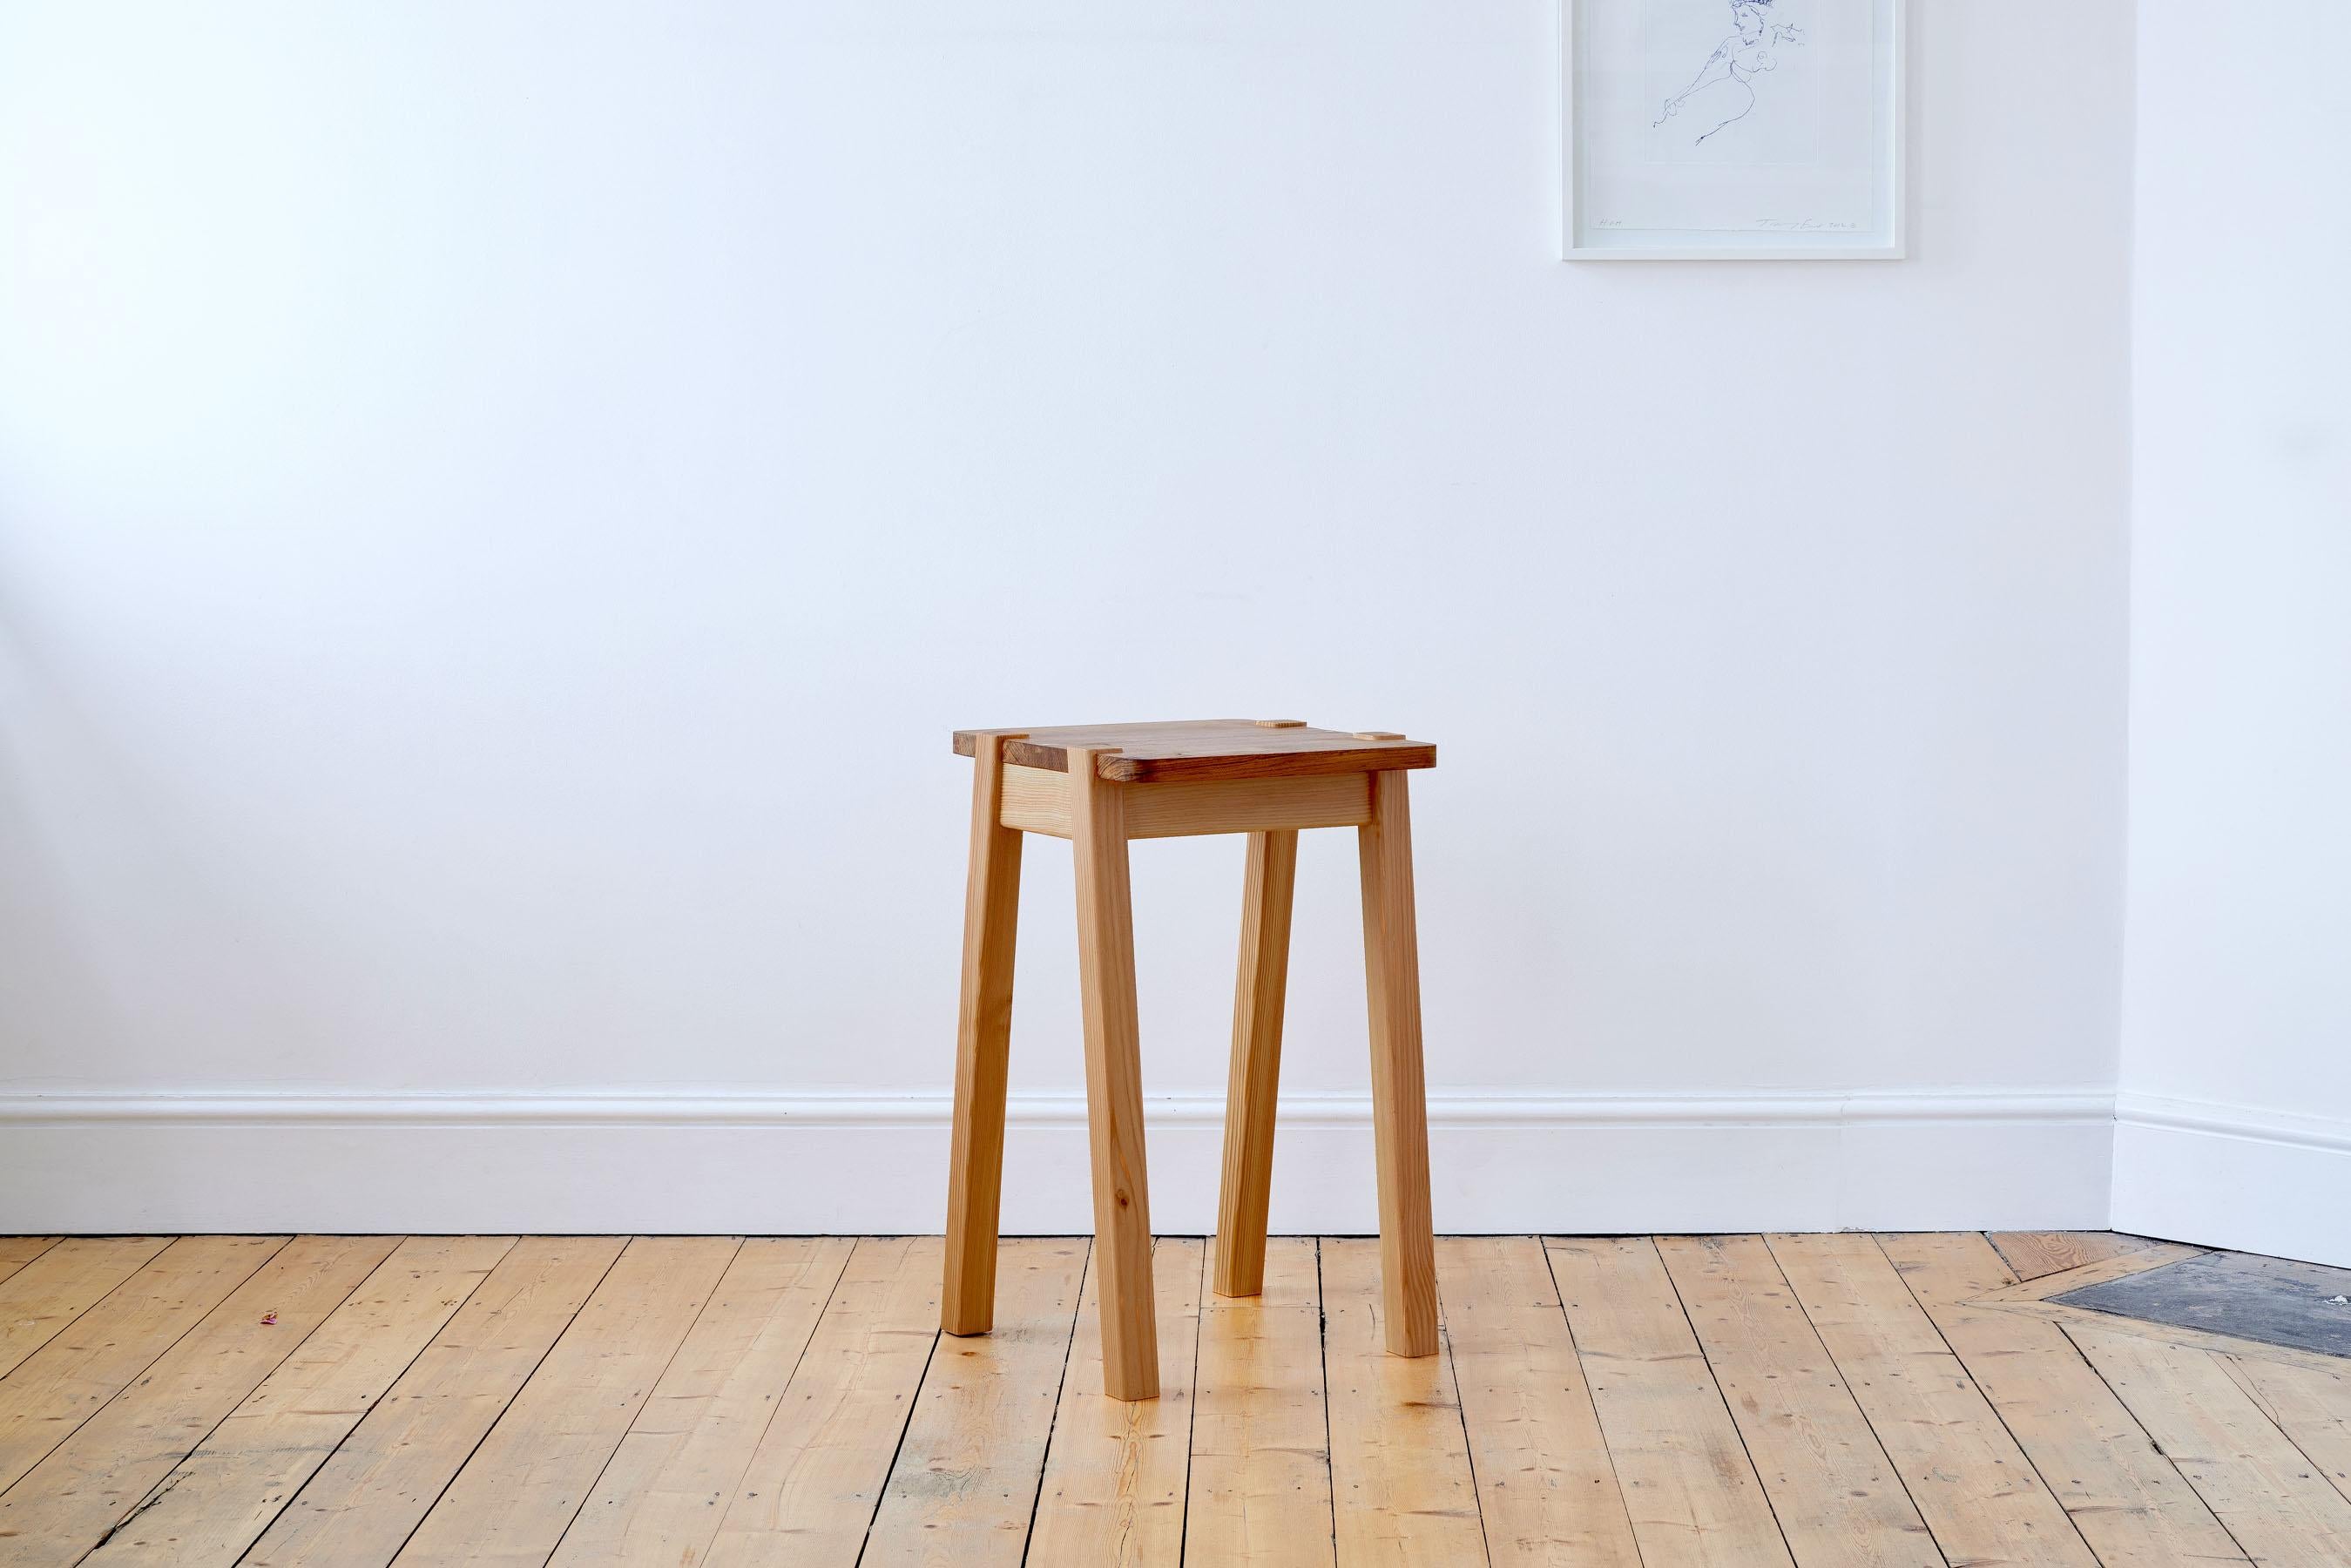 A modern statement in any home, its minimal design marries two contrasting yet complementary wood types - rich elm and warm beech - and features thoughtful brass detailing. 

The chair is designed and handmade-to-order by our Designer and Maker,